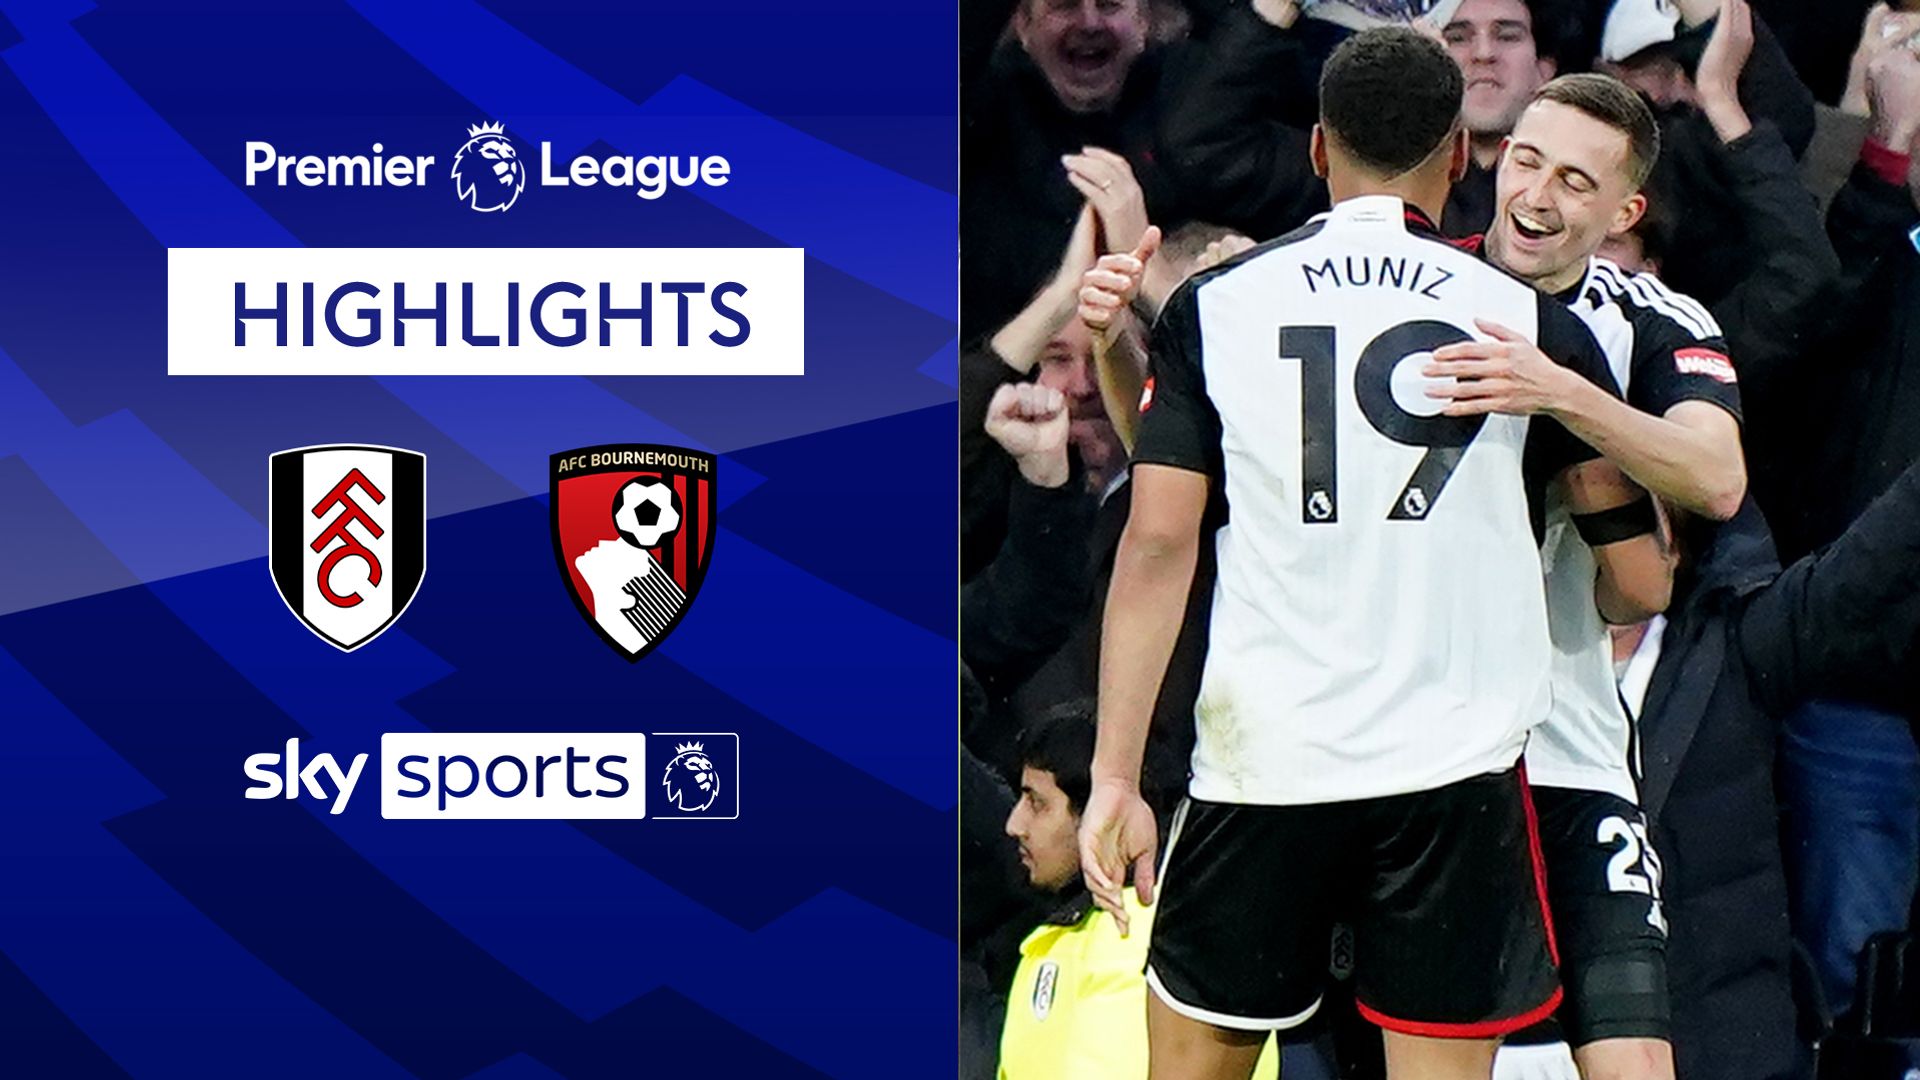 Muniz hits double for Fulham as they beat Bournemouth